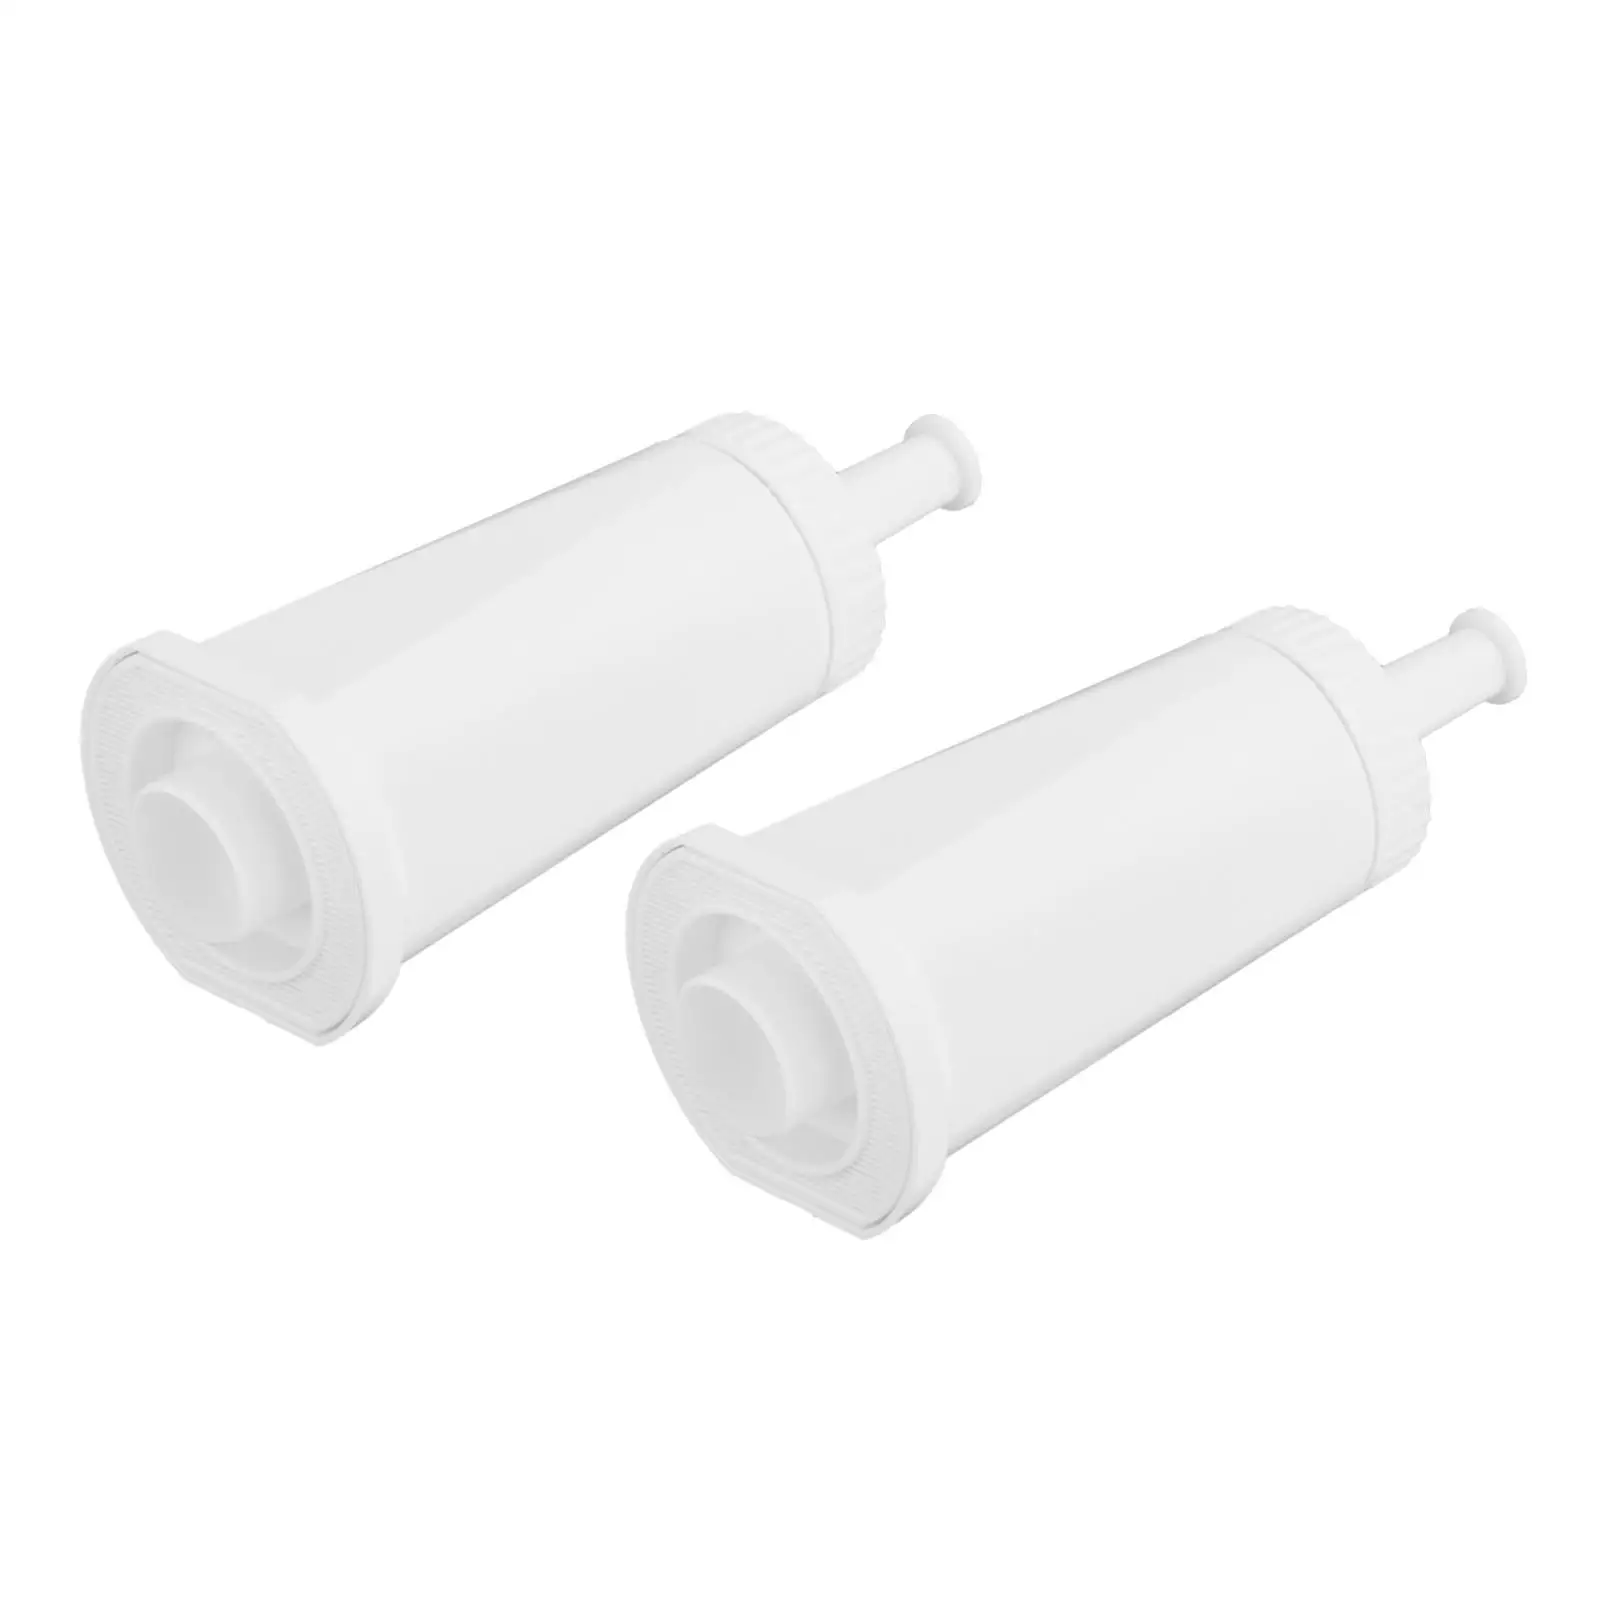 2x Water Filters for Bambino Coffee Machine Compare #BES008WHT0NUC1